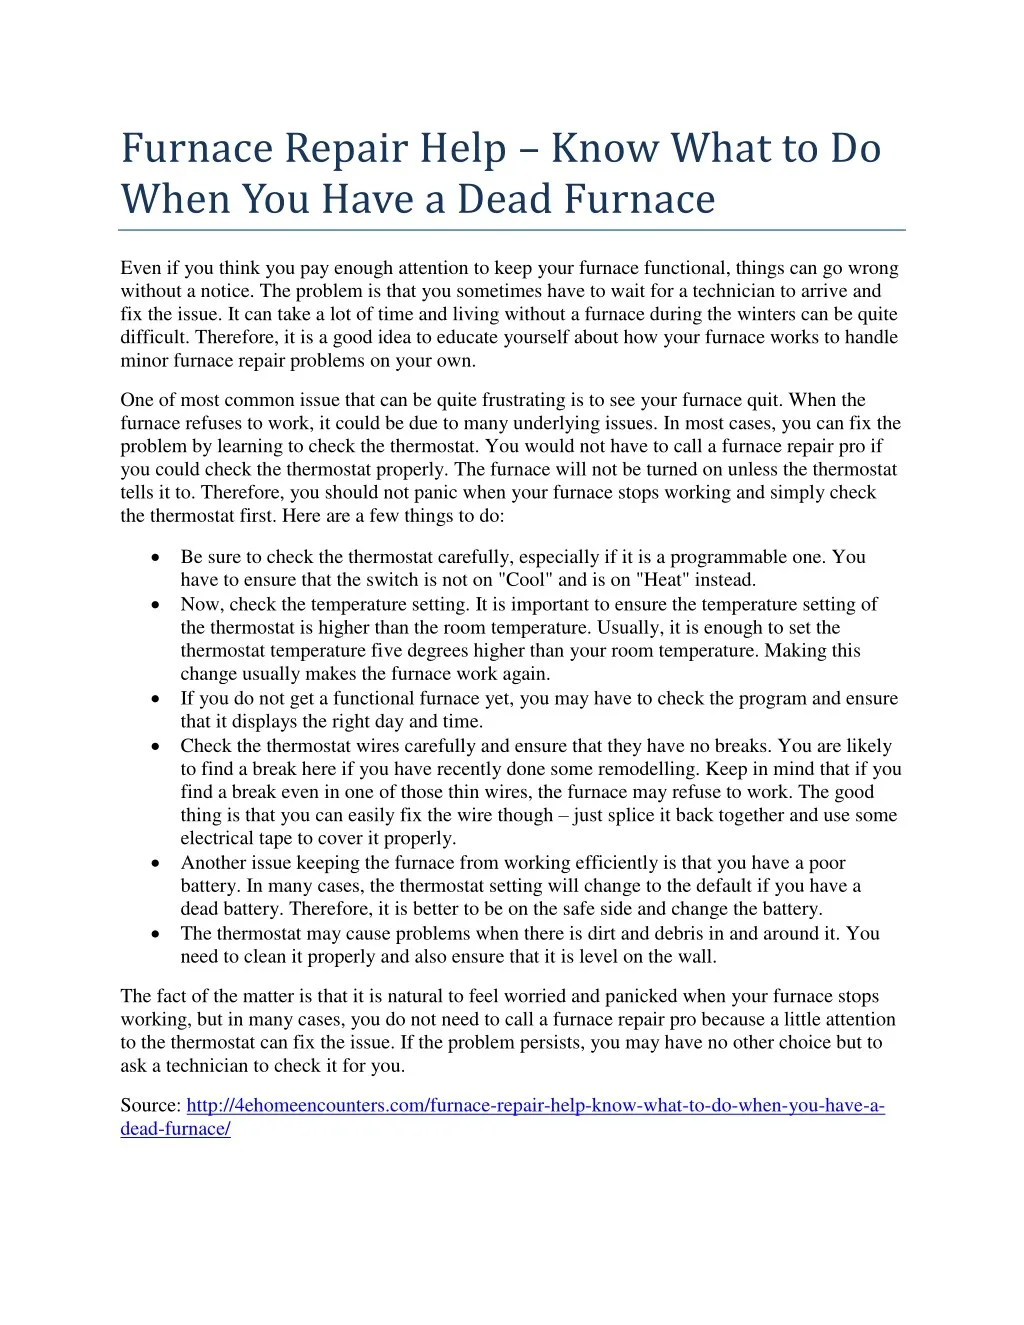 furnace repair help know what to do when you have